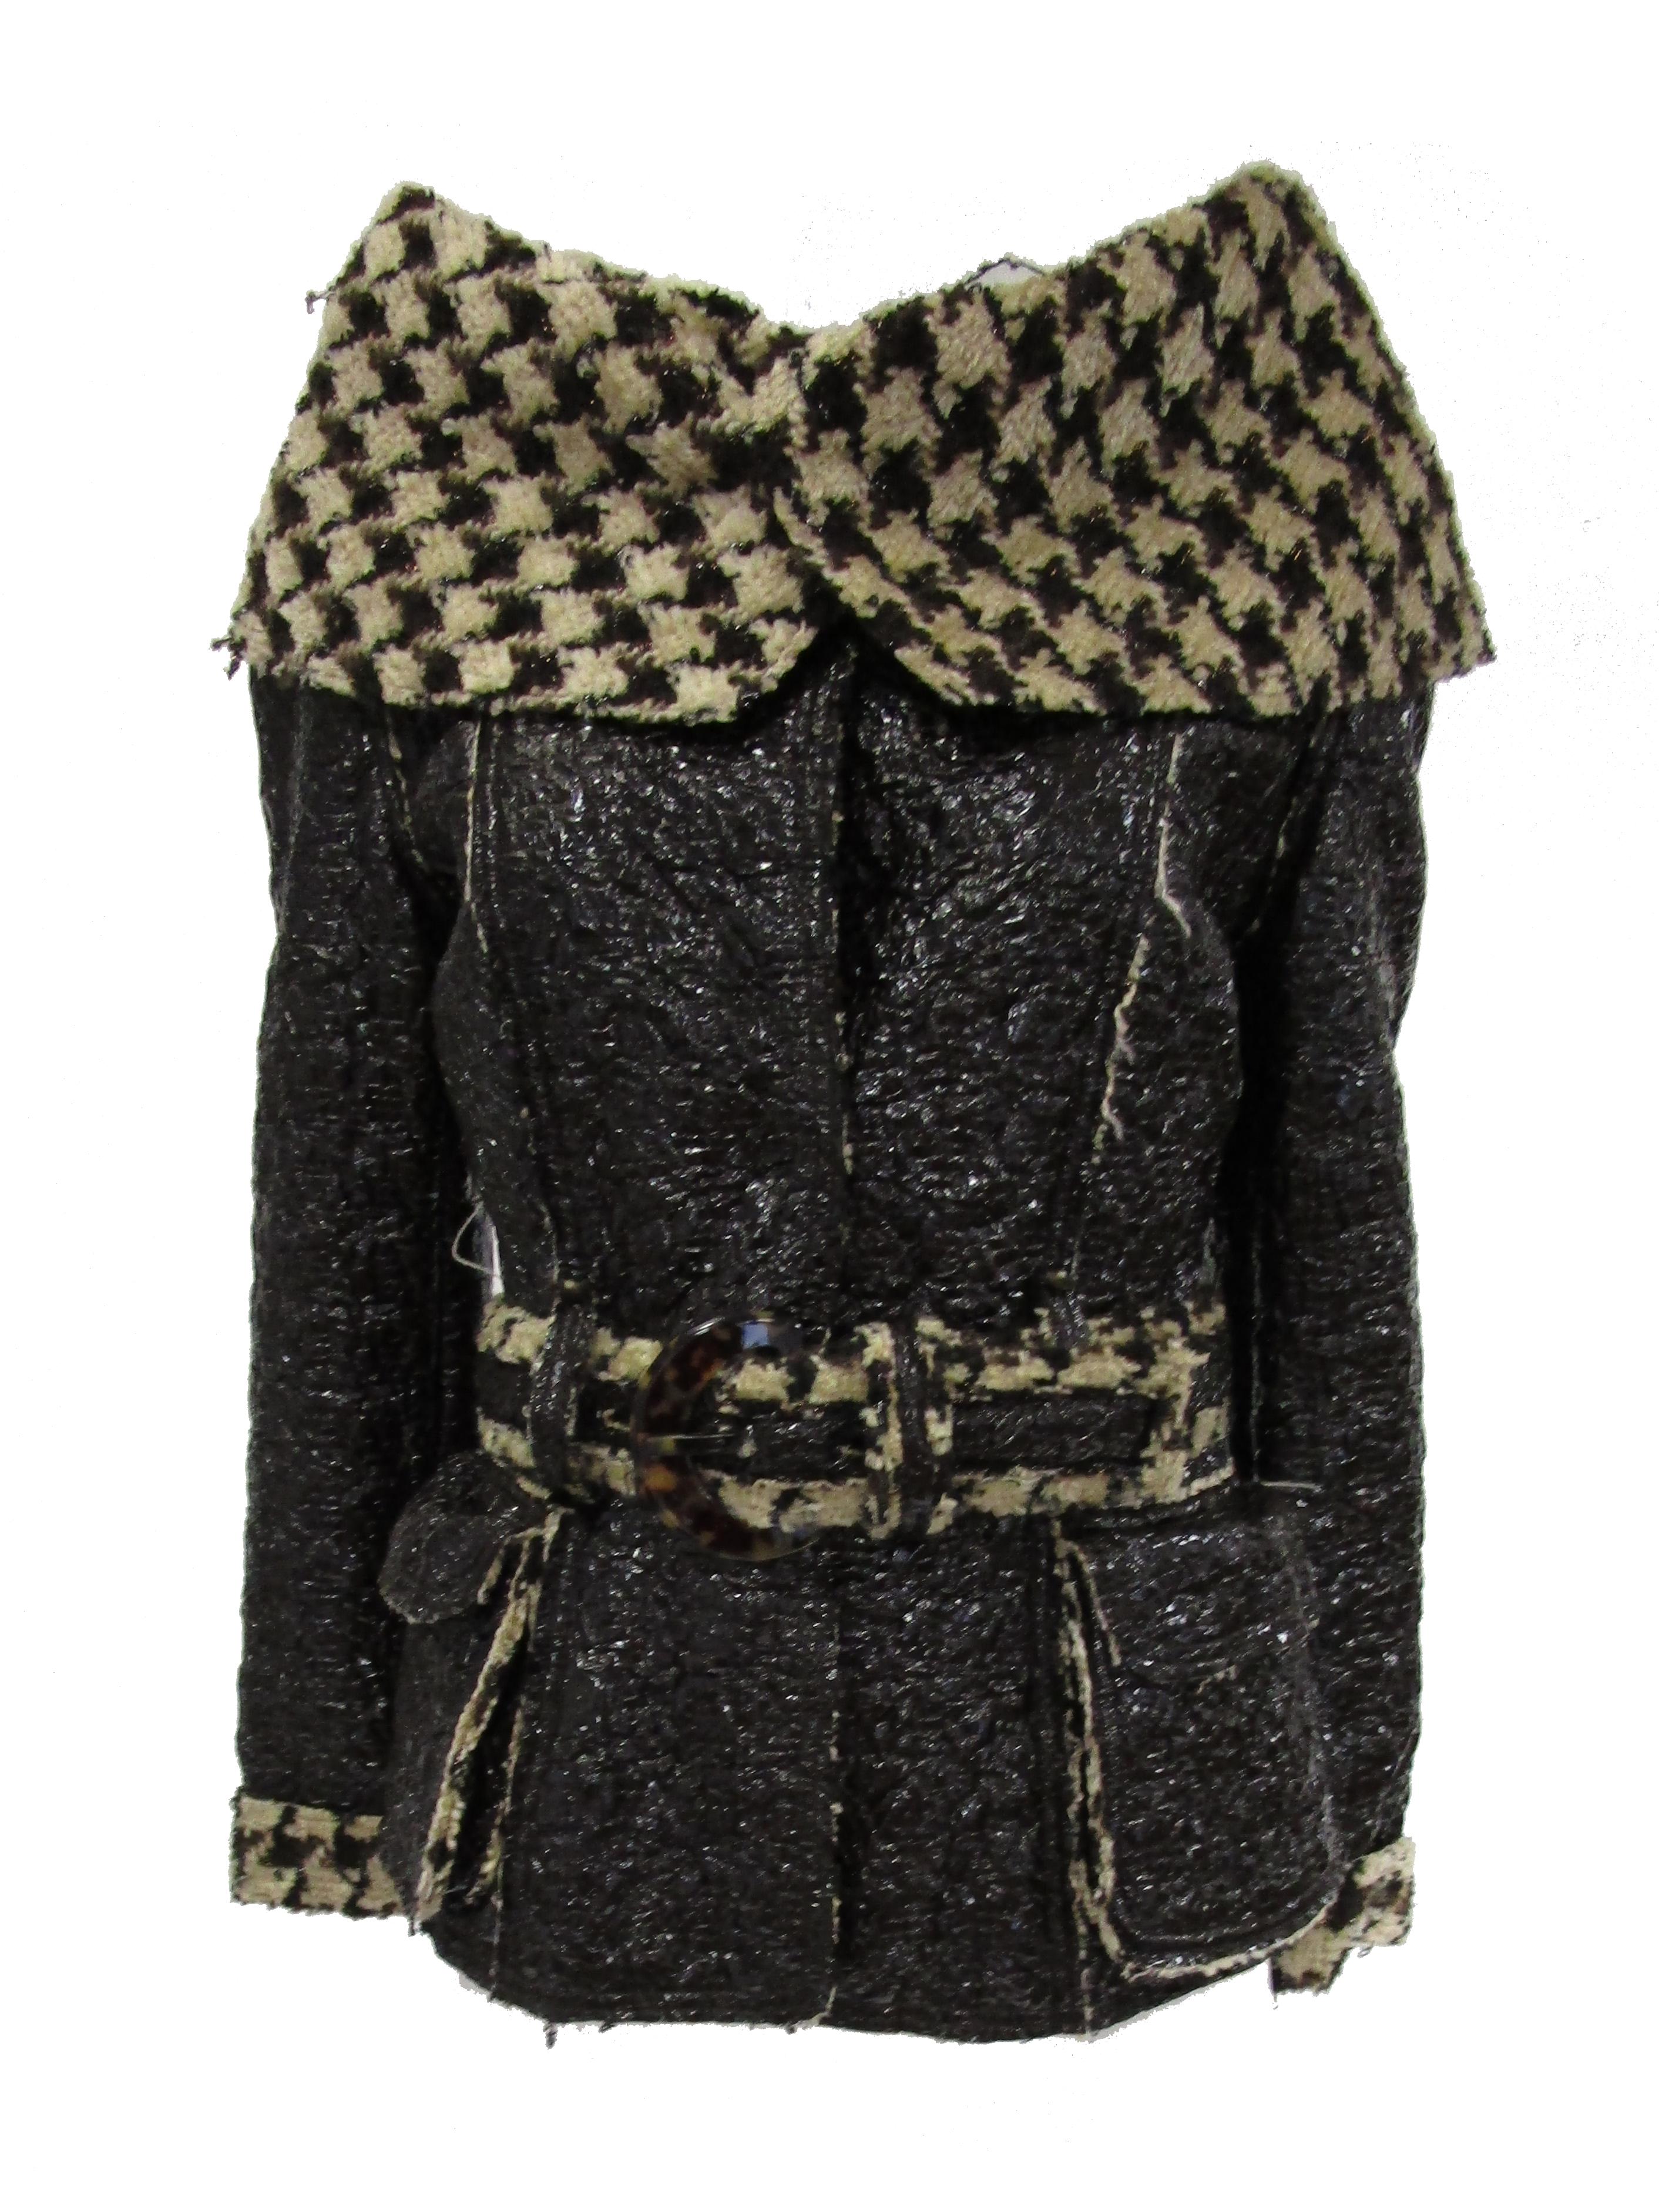 Delightful and unexpected jacket by Oscar de la Renta. This hip - length black coat features a glossy crackle coated brown fabric that is accented by a bold but supple houndstooth print on the collar. The collar is something else! It folds over the